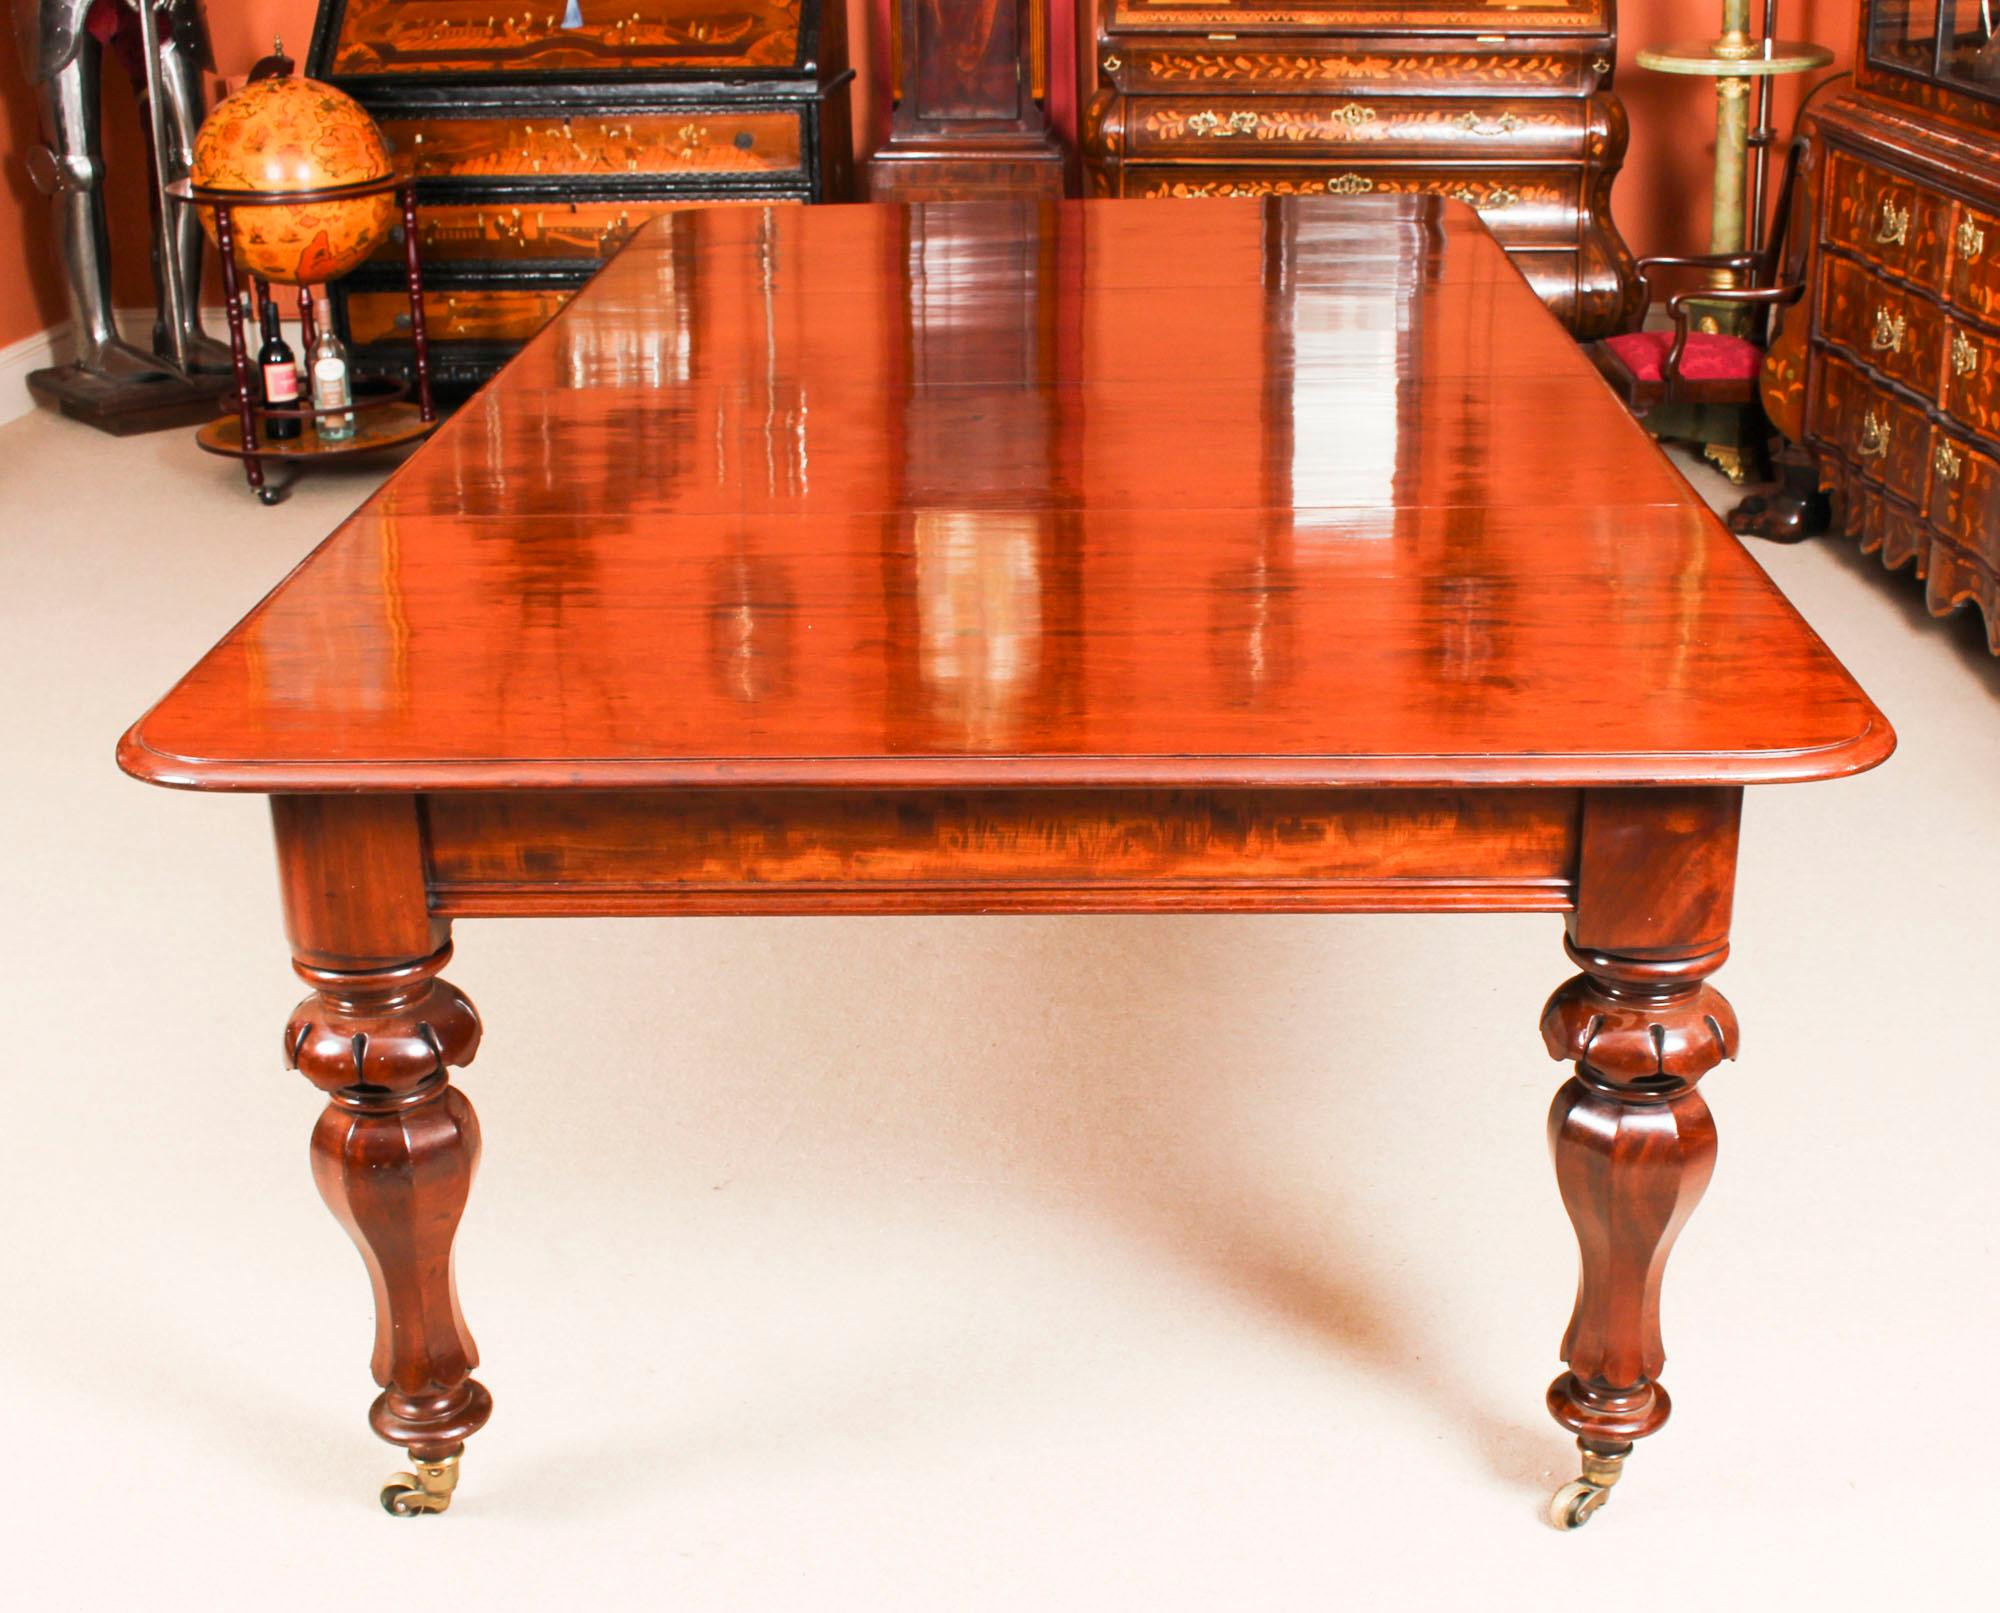 This is a fantastic antique William IV solid mahogany dining table which can seat ten in comfort, circa 1830 in date.

This beautiful table is in stunning flame mahogany and has two leaves of approximately two feet (60cm) each, which can be added or